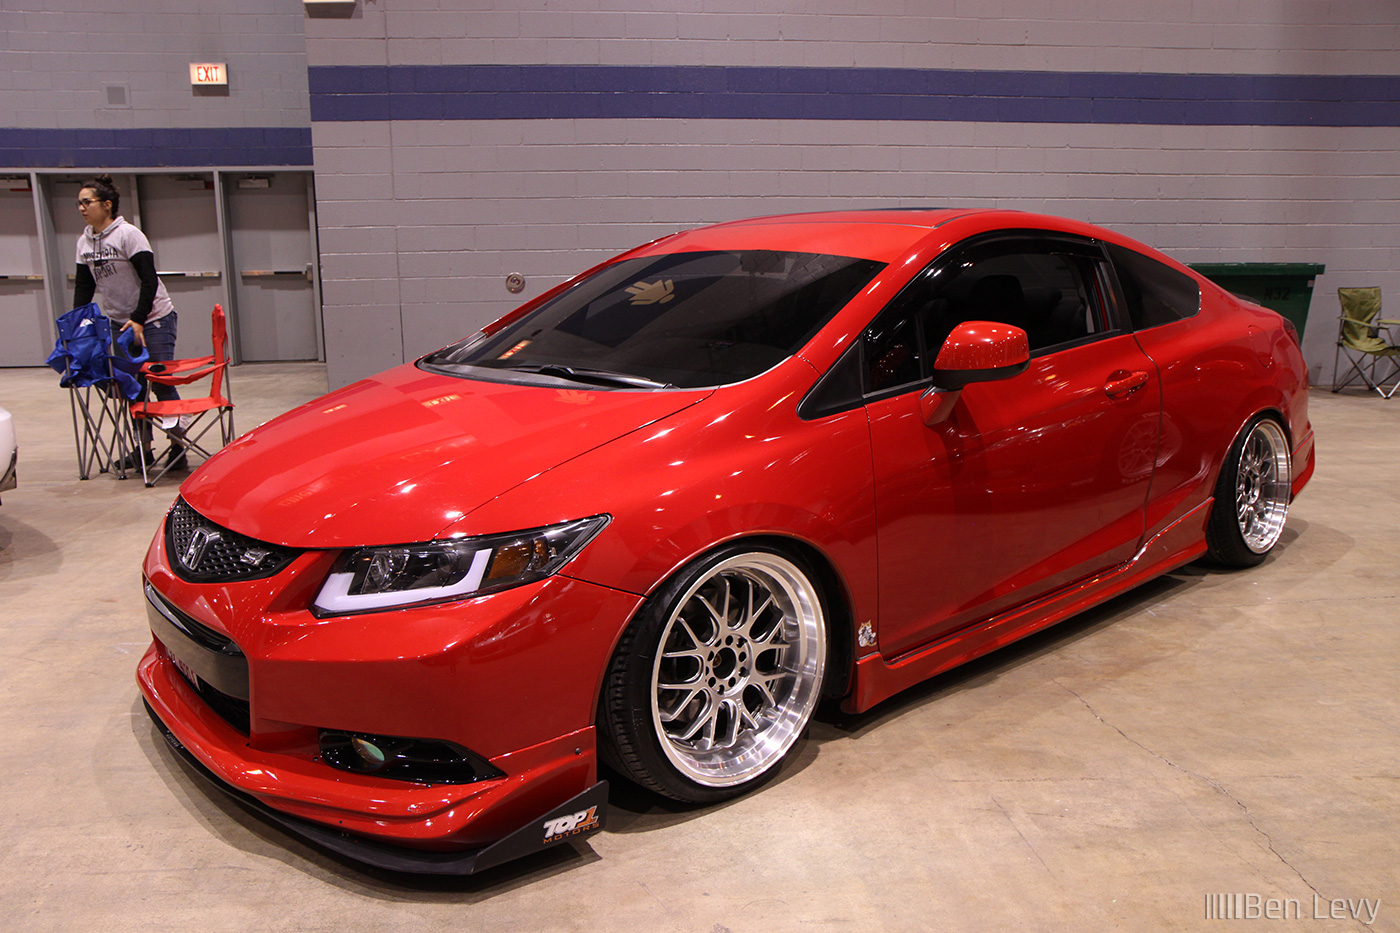 Red Civic Si coupe